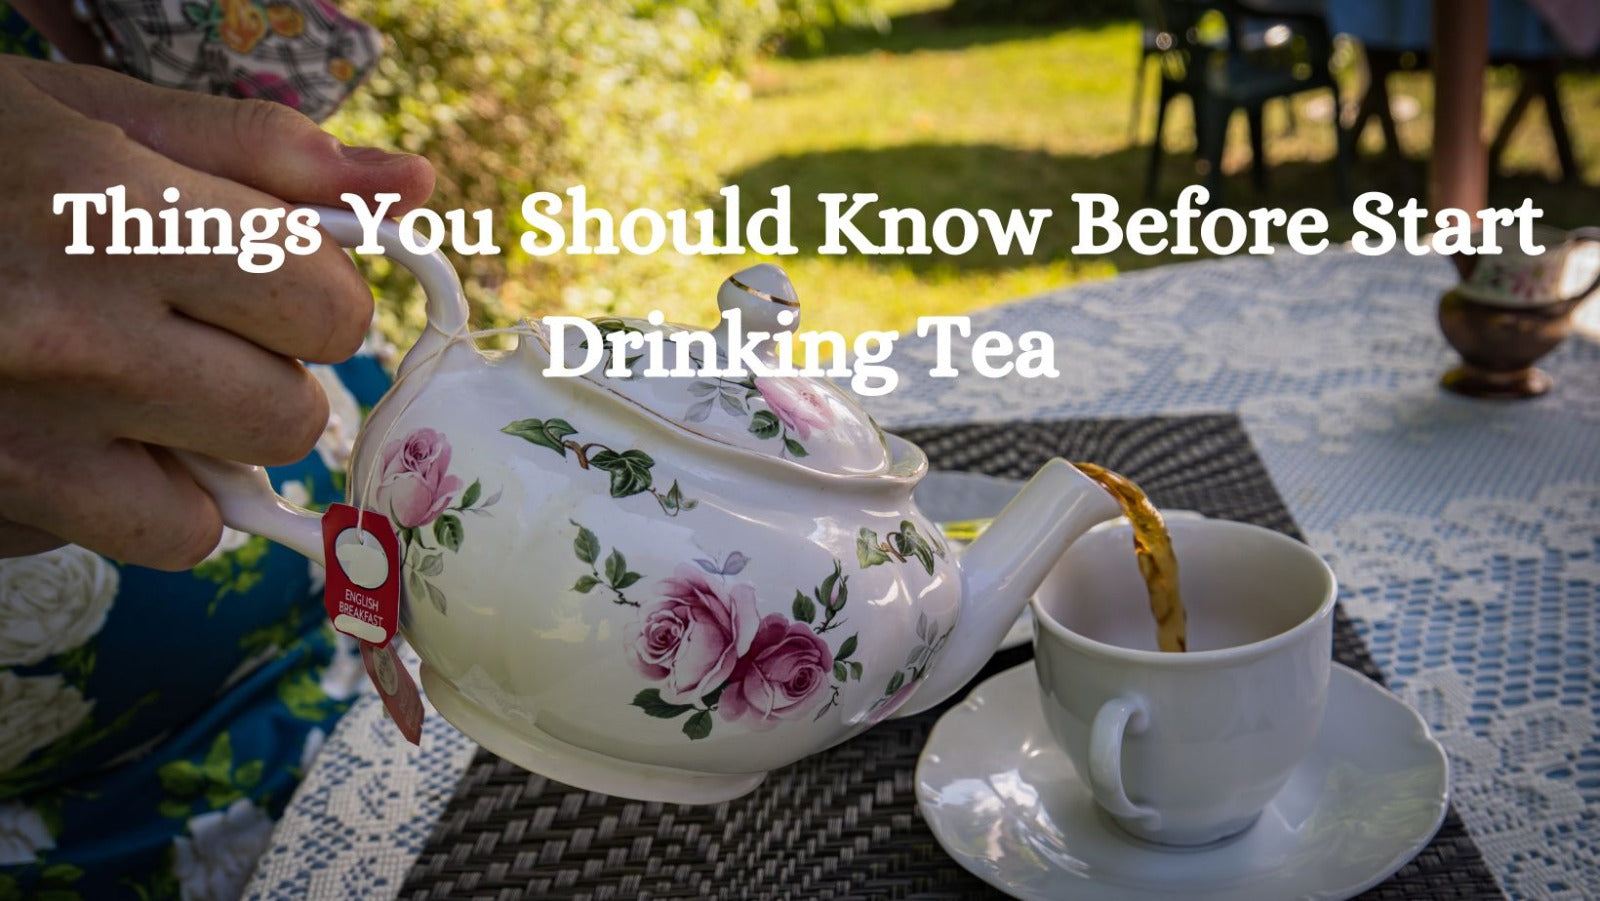 Things You Should Know Before Start Drinking Tea